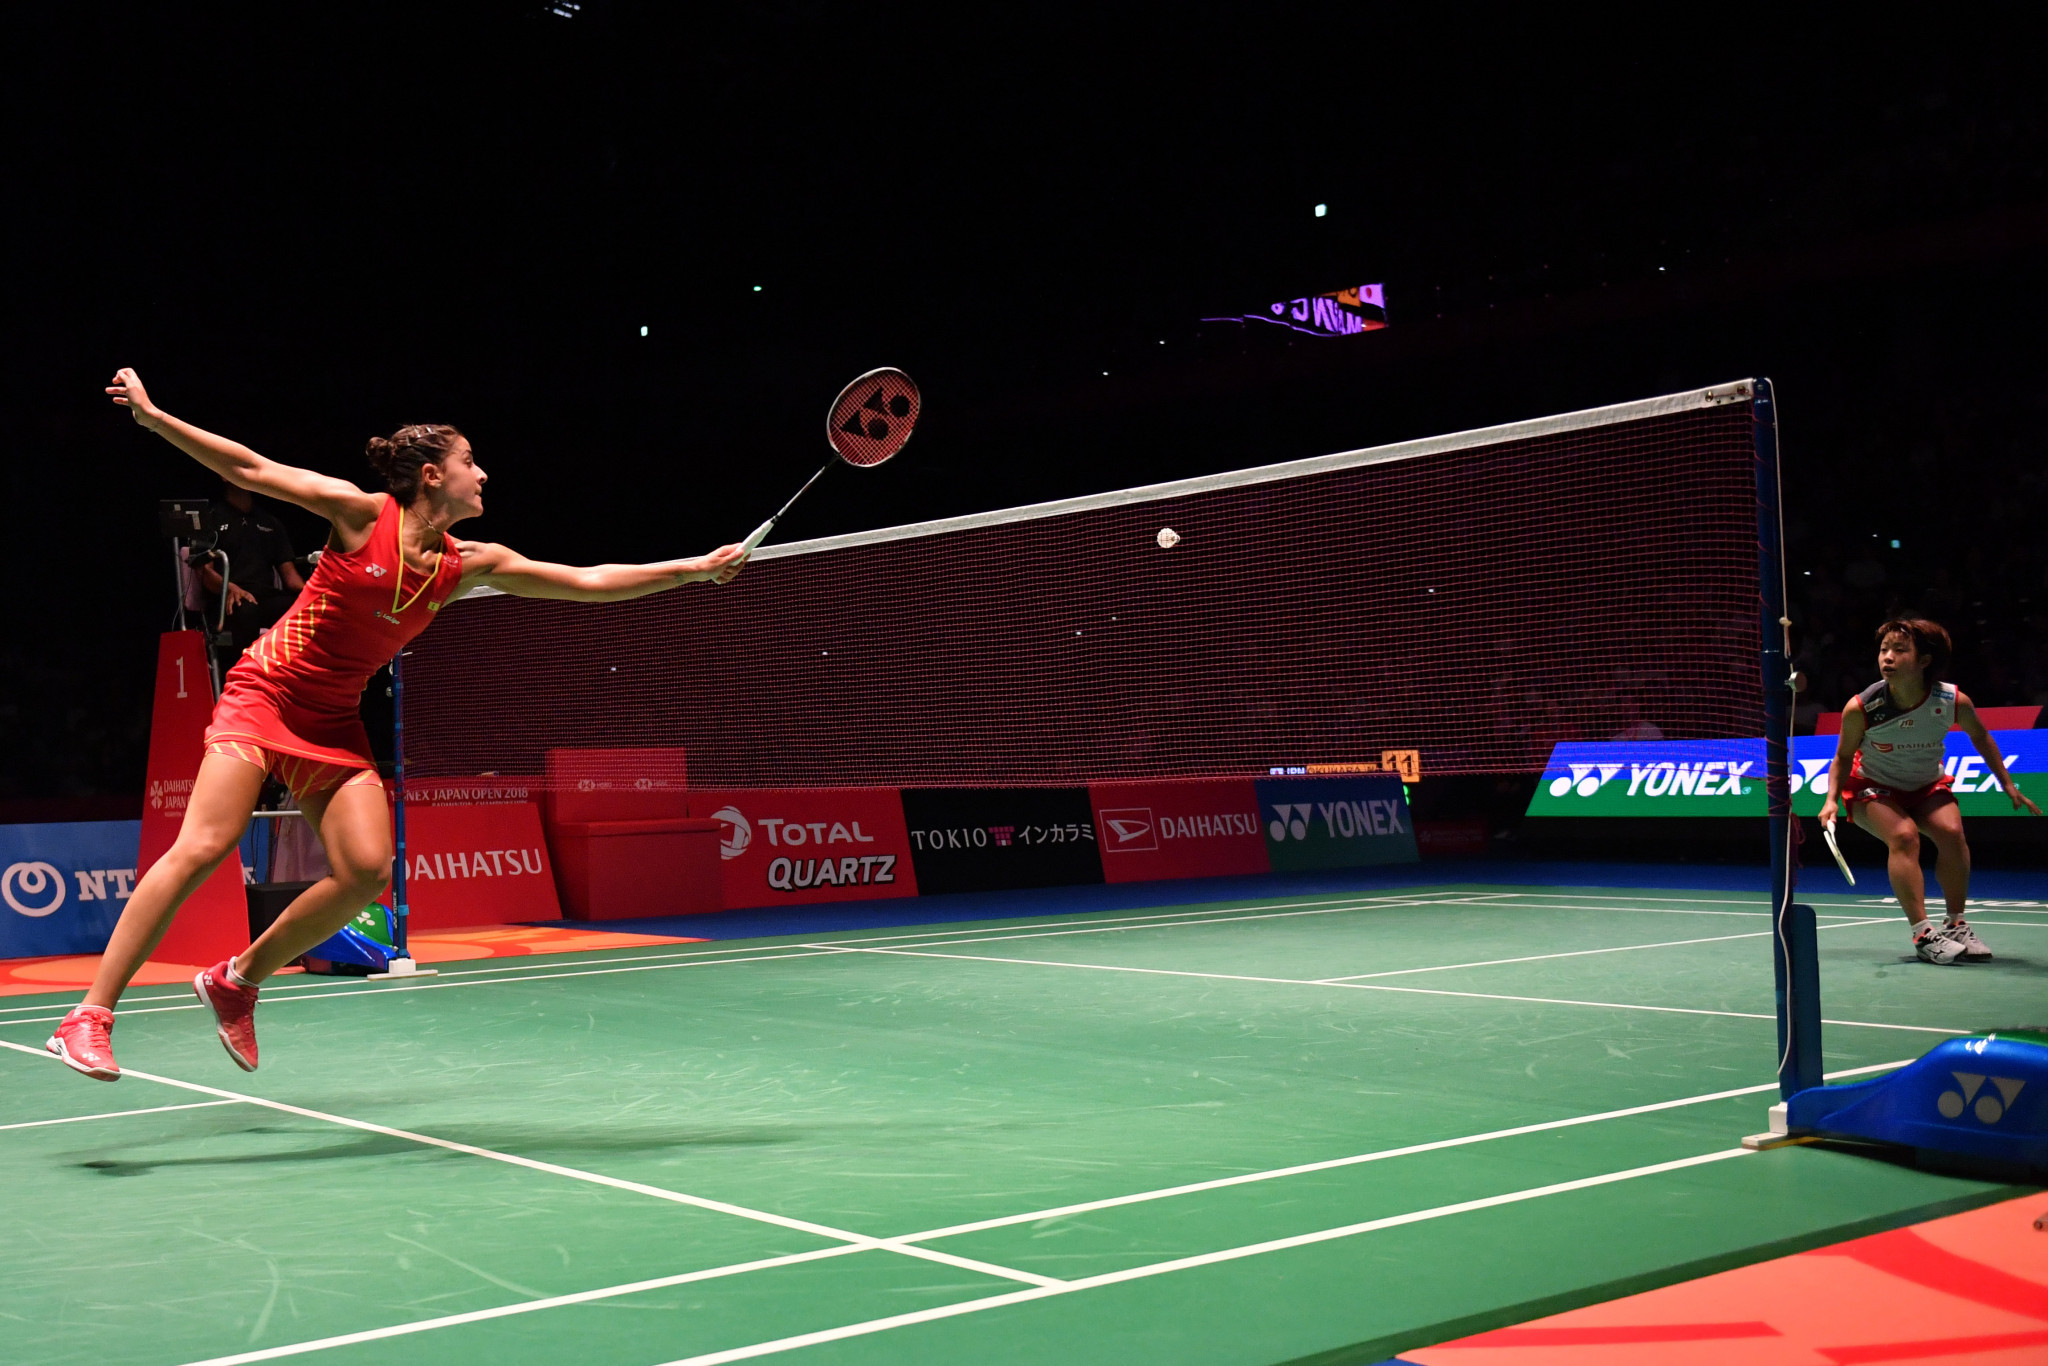 Olympic and world champion Carolina Marin battled past Japan's eighth seed Nozomi Okuhara in three games to win the women's title ©Getty Images